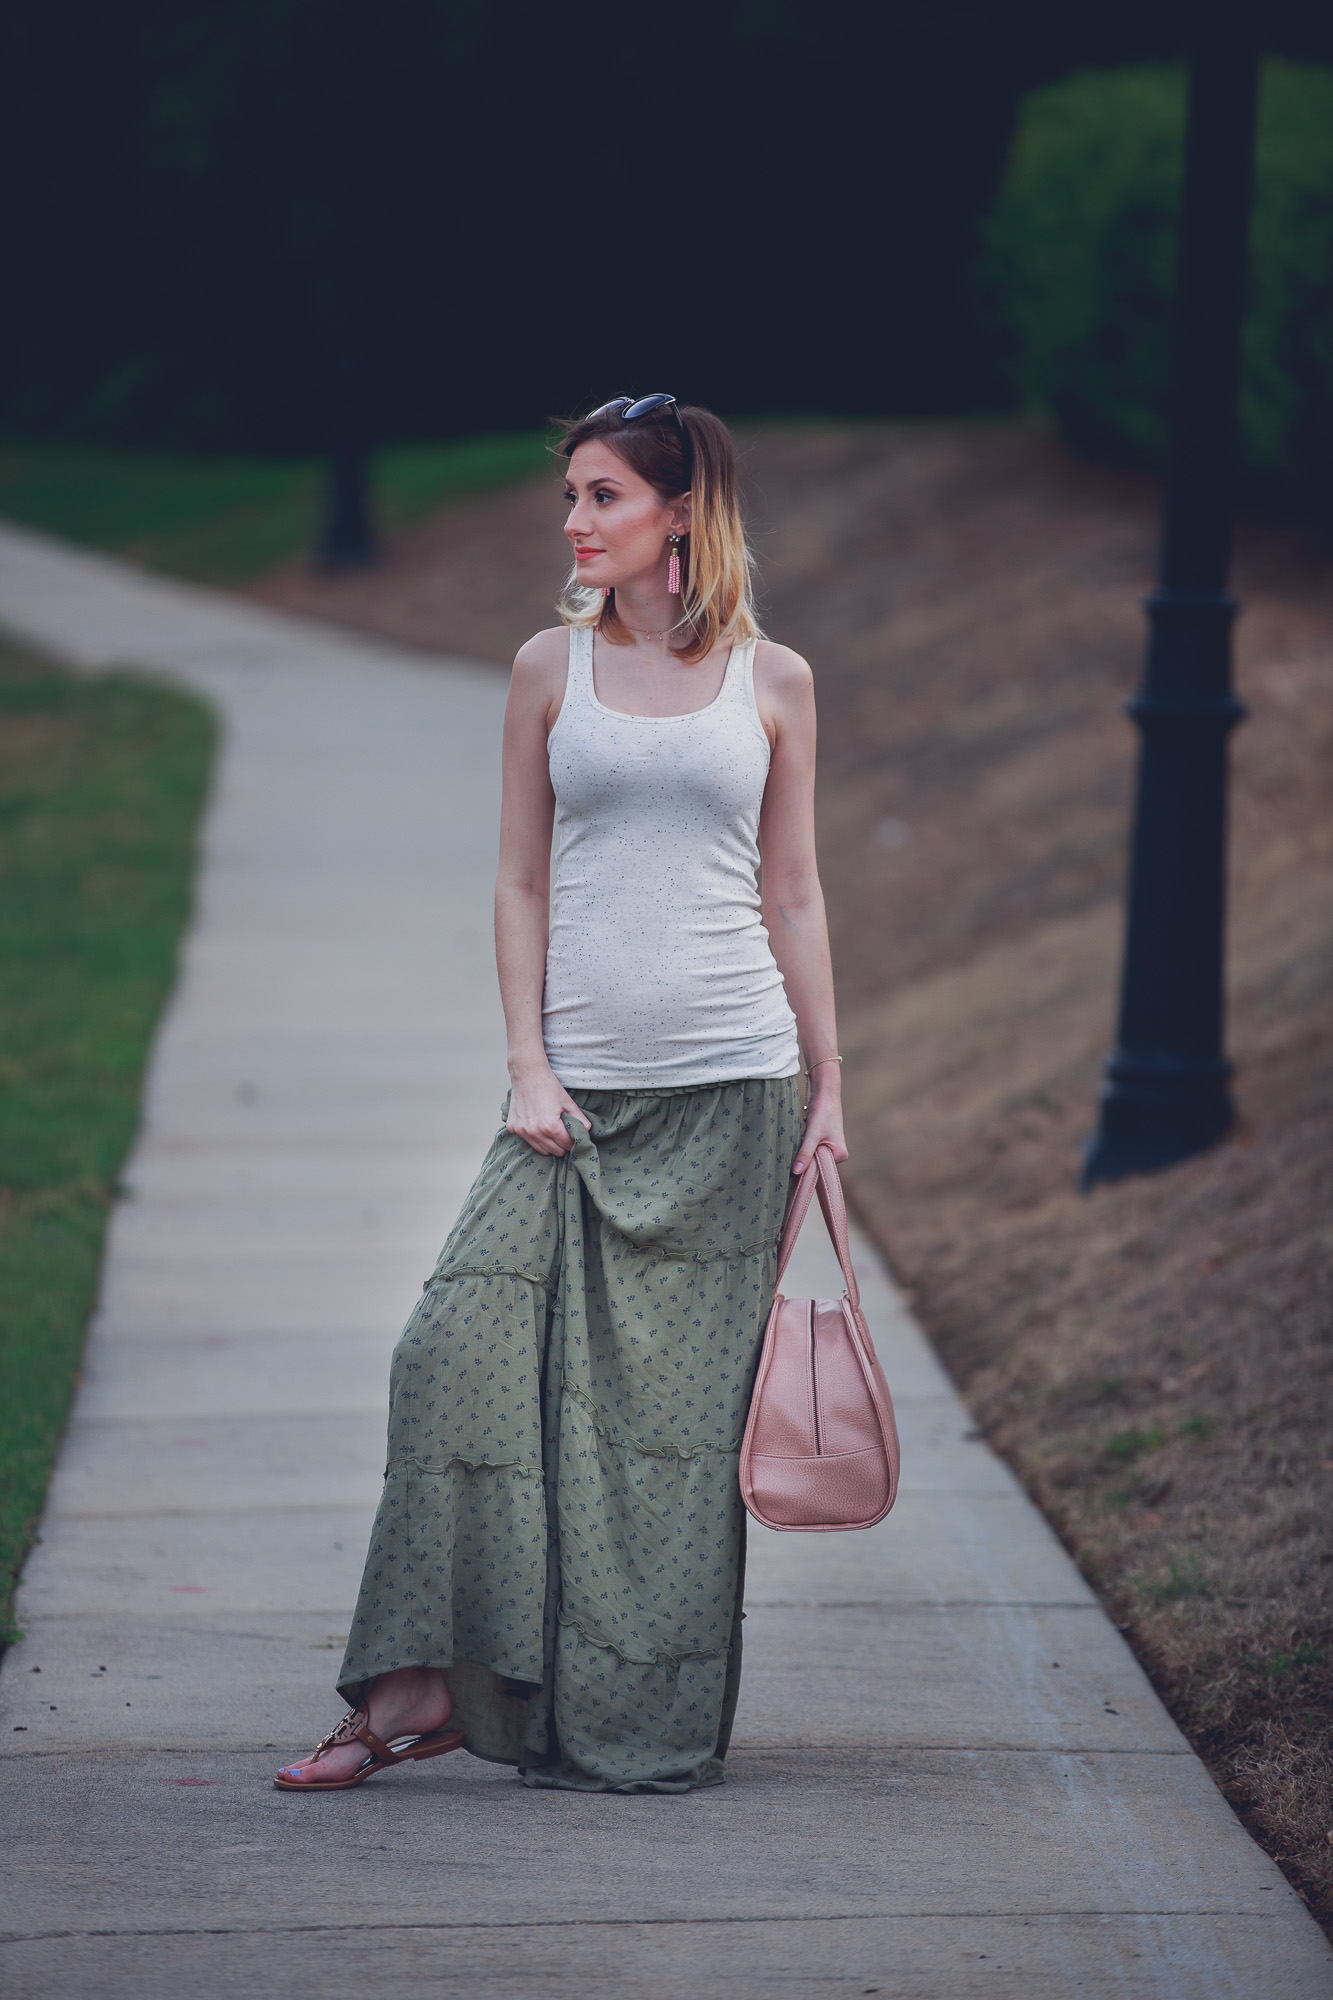 Jessica Linn from the lifestyle and fashion blog Linn Style wearing a green maxi skirt from Target, and tan tank top from Target, Baublebar earrings, a Kendra Scott bracelet, Charming Charlie sunglasses and carrying a Matt and Nat purse. 17 weeks pregnant maternity pregnancy clothes and style.